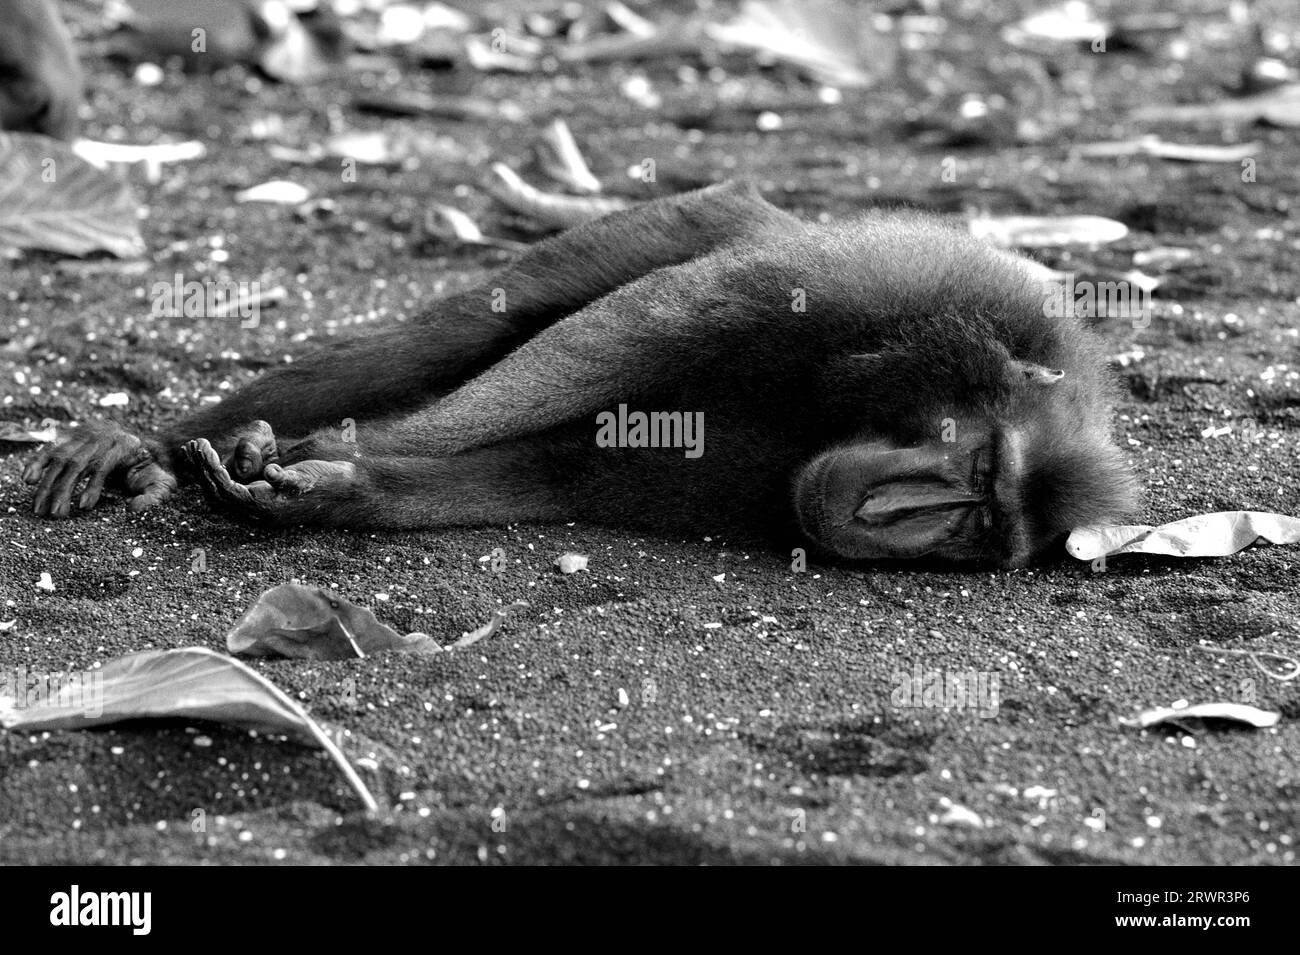 A crested macaque (Macaca nigra) takes a nap as it is lying on a sandy beach in Tangkoko forest, North Sulawesi, Indonesia. A recent report by a team of scientists led by Marine Joly revealed that the temperature is increasing in Tangkoko forest, and the overall fruit abundance decreased. 'Between 2012 and 2020, temperatures increased by up to 0.2 degree Celsius per year in the forest, and the overall fruit abundance decreased by 1 percent per year,” they wrote on International Journal of Primatology. 'In a warmer future, they would have to adjust, resting and staying in the shade during the.. Stock Photo